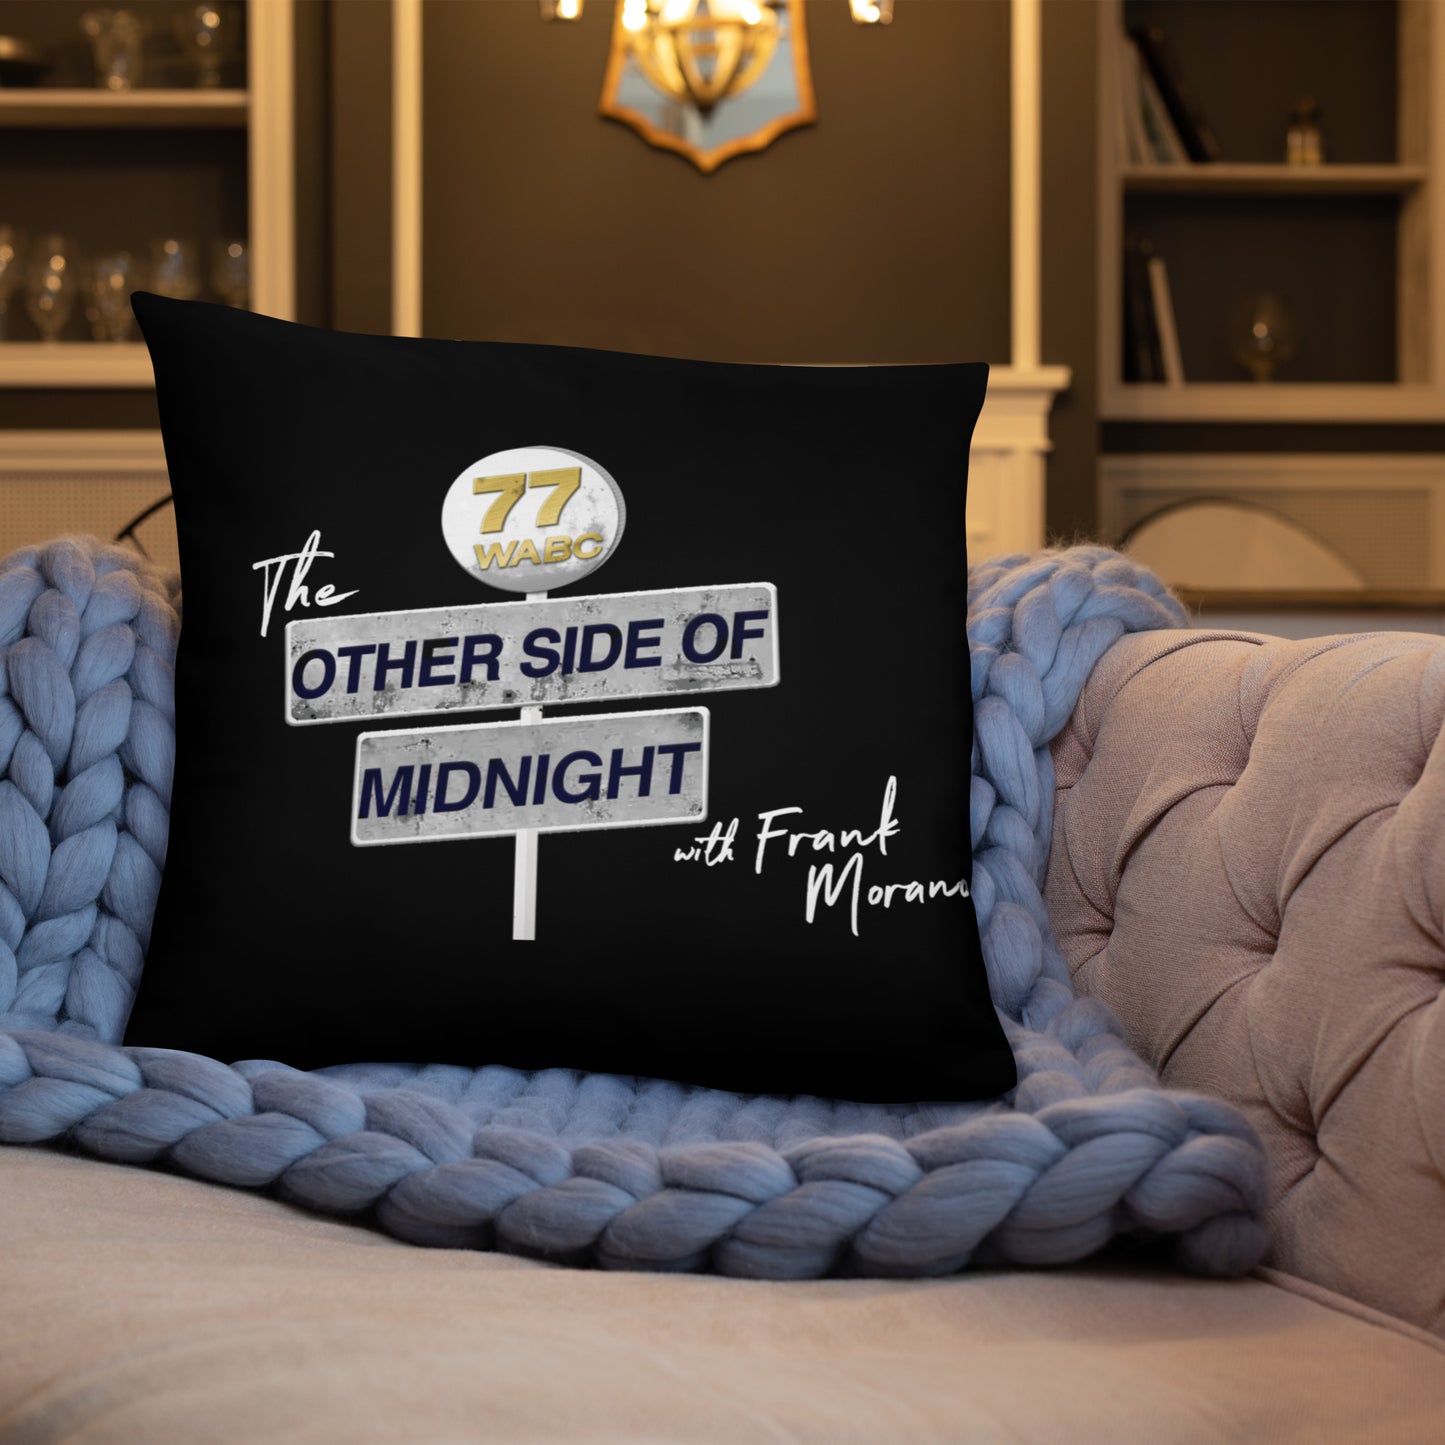 Frank Morano's The Other Side of Midnight Pillow (Multiple Sizes)